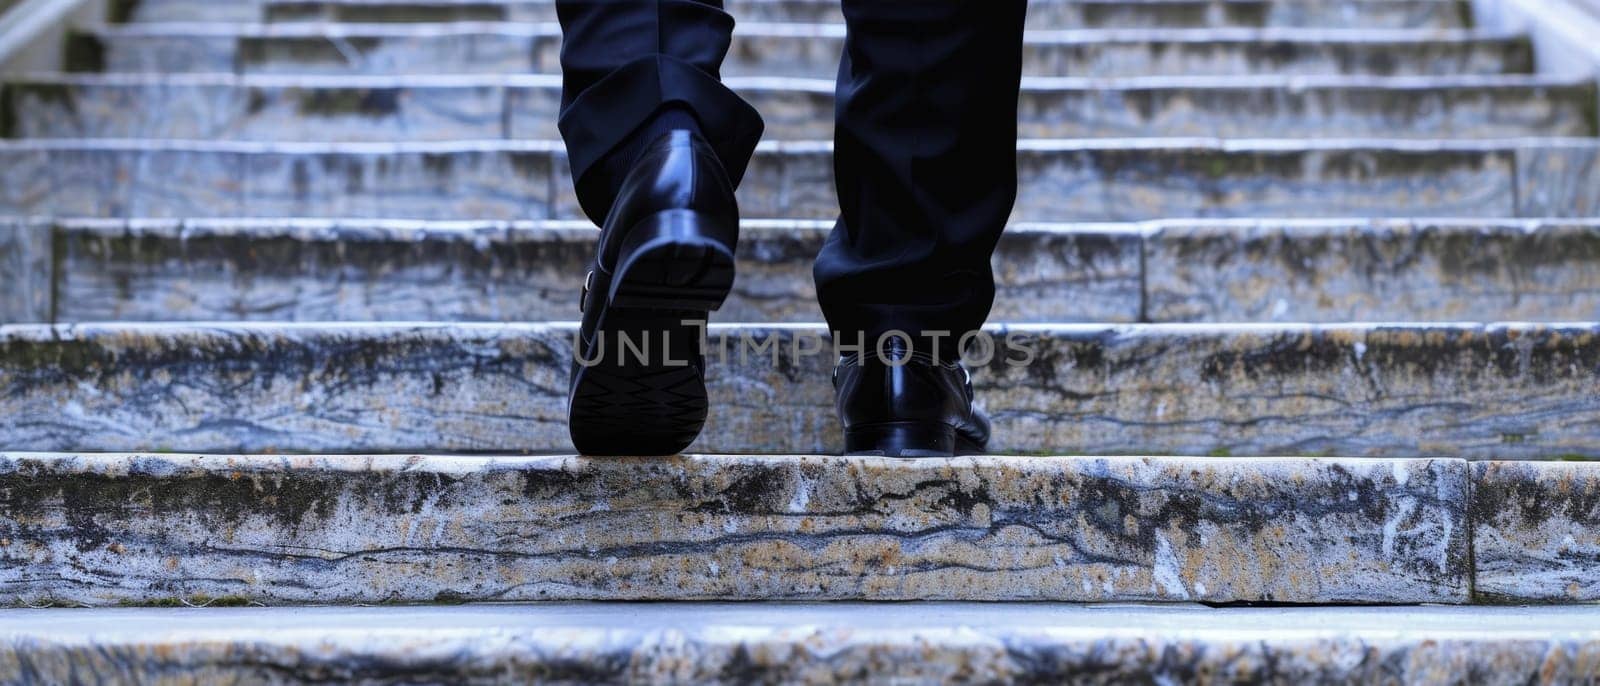 An individual in business attire confidently advances up an outdoor staircase, wearing a pair of sleek black dress shoes.